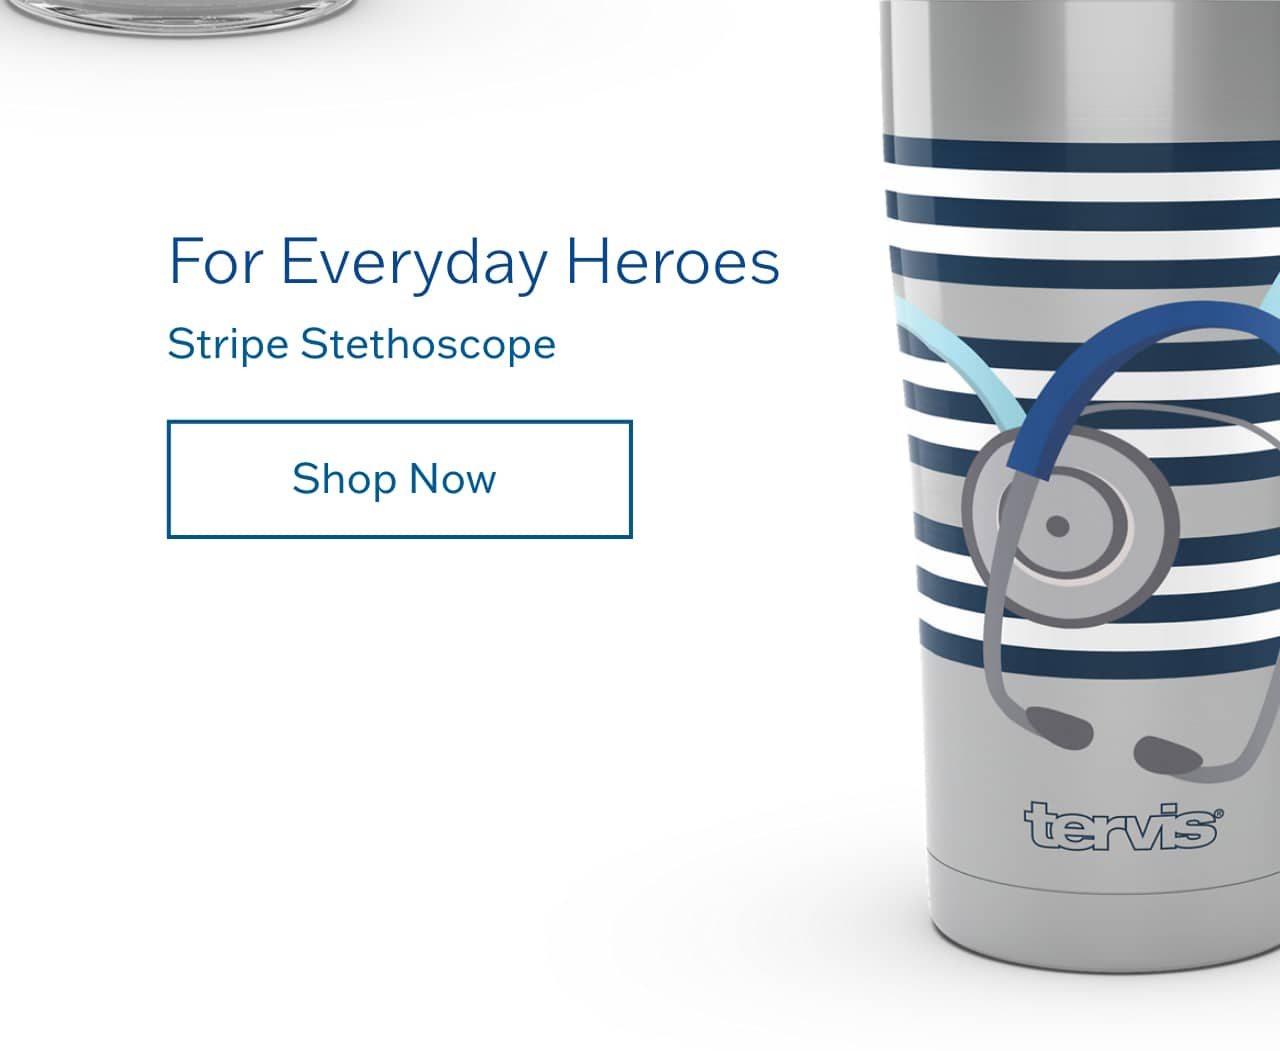 For Everyday Heroes - Stripe Stethoscope